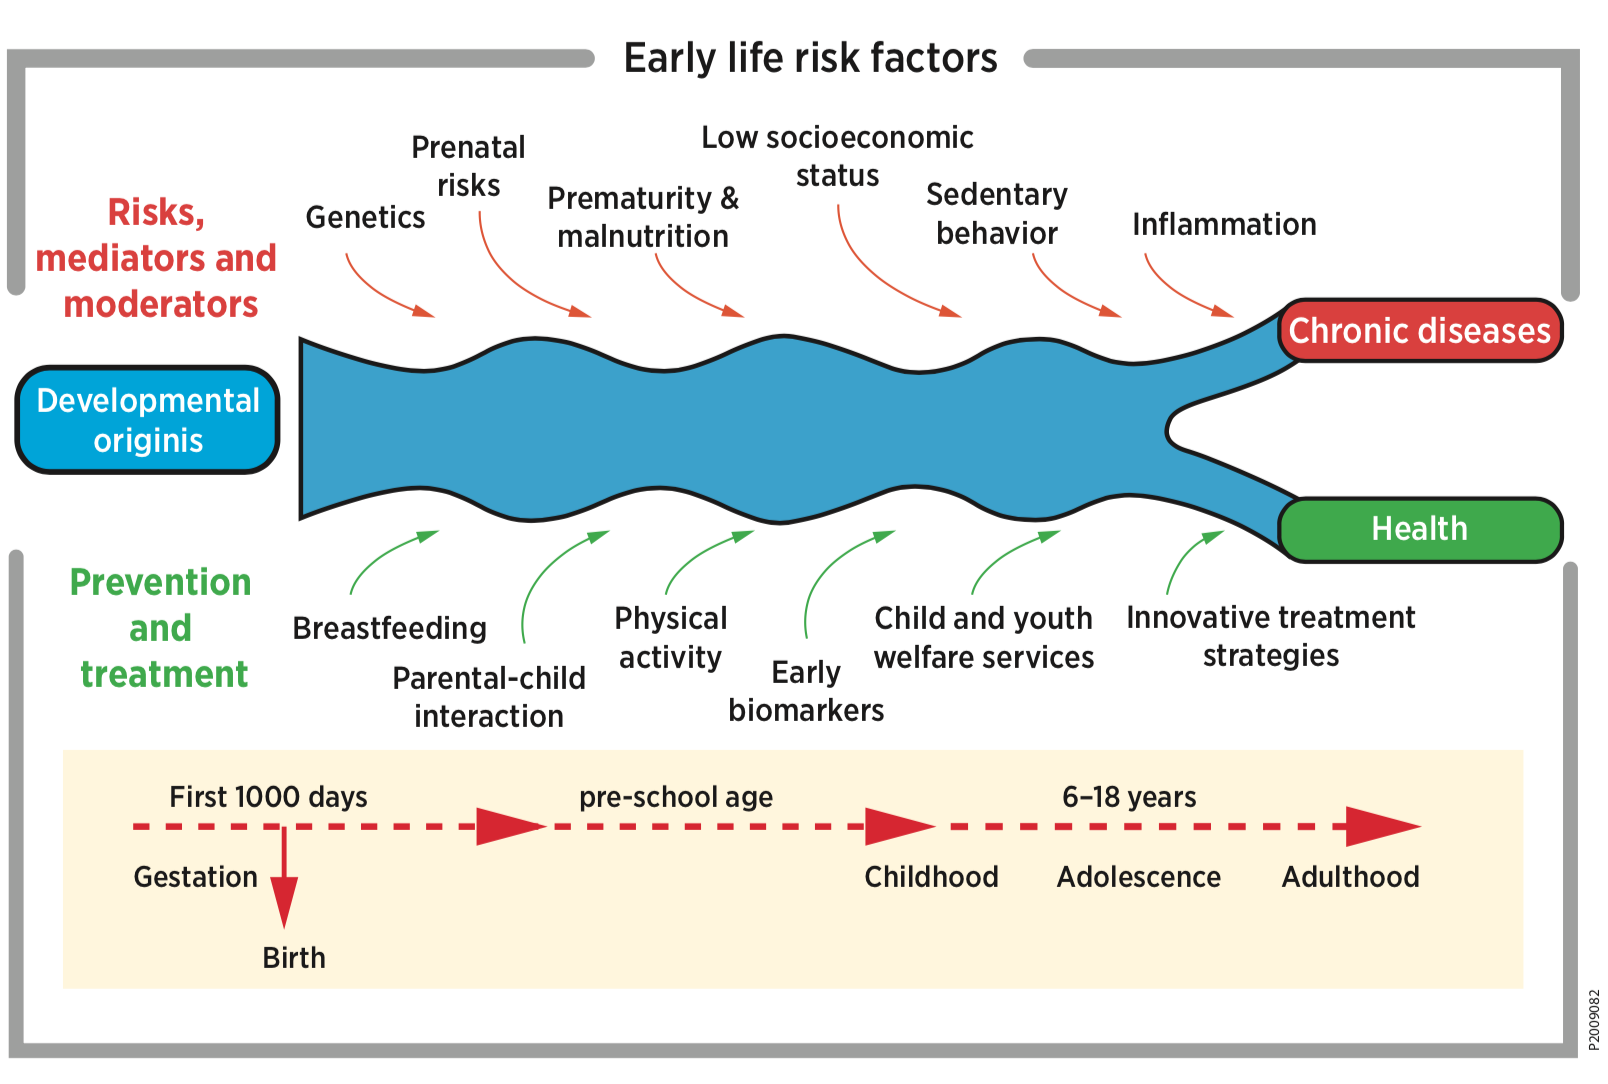 Abb. 8: Early life origins of chronic diseases: red arrows indicate the risks, mediators, and modulators of health and chronic somatic and mental diseases; in contrast, green arrows provide measurements, preventive strategies and therapies to promote health.